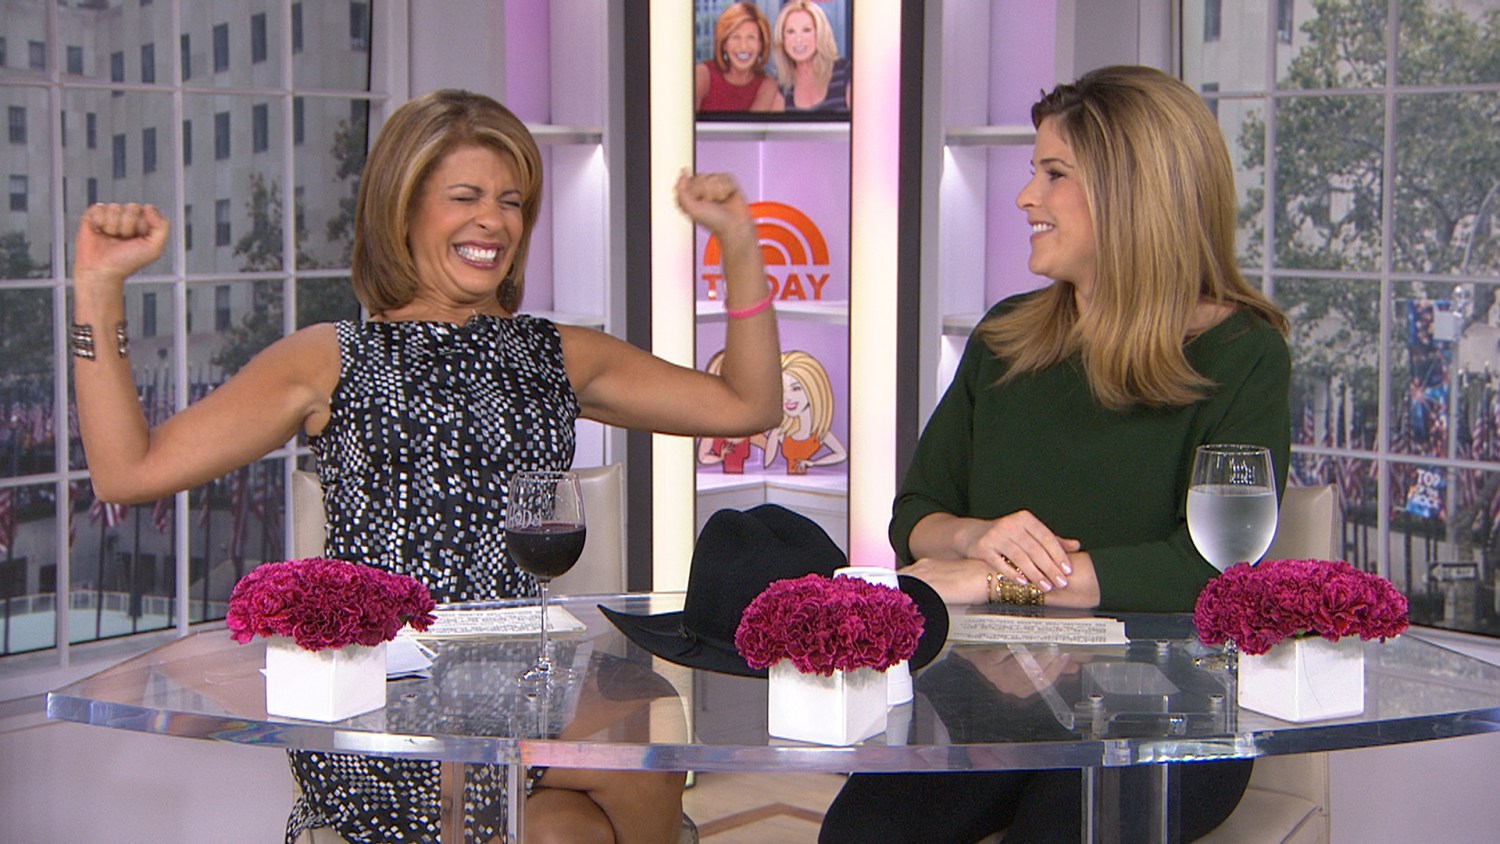 Smooch! Hoda, Jenna share first kiss stories photo picture